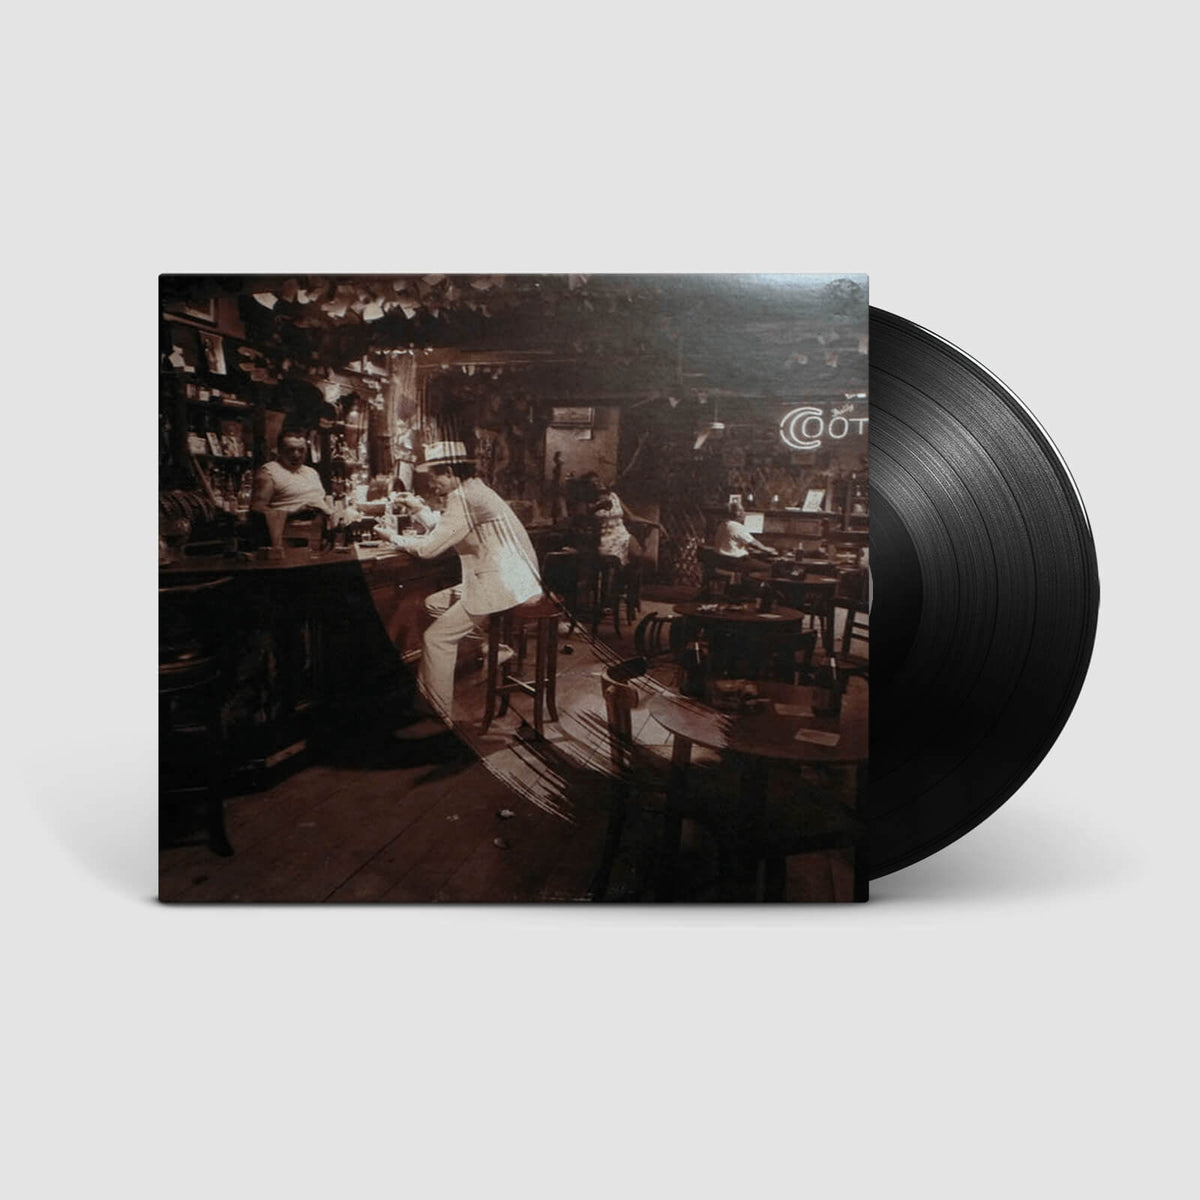 Led Zeppelin : In Through the out Door (2015 Remaster)